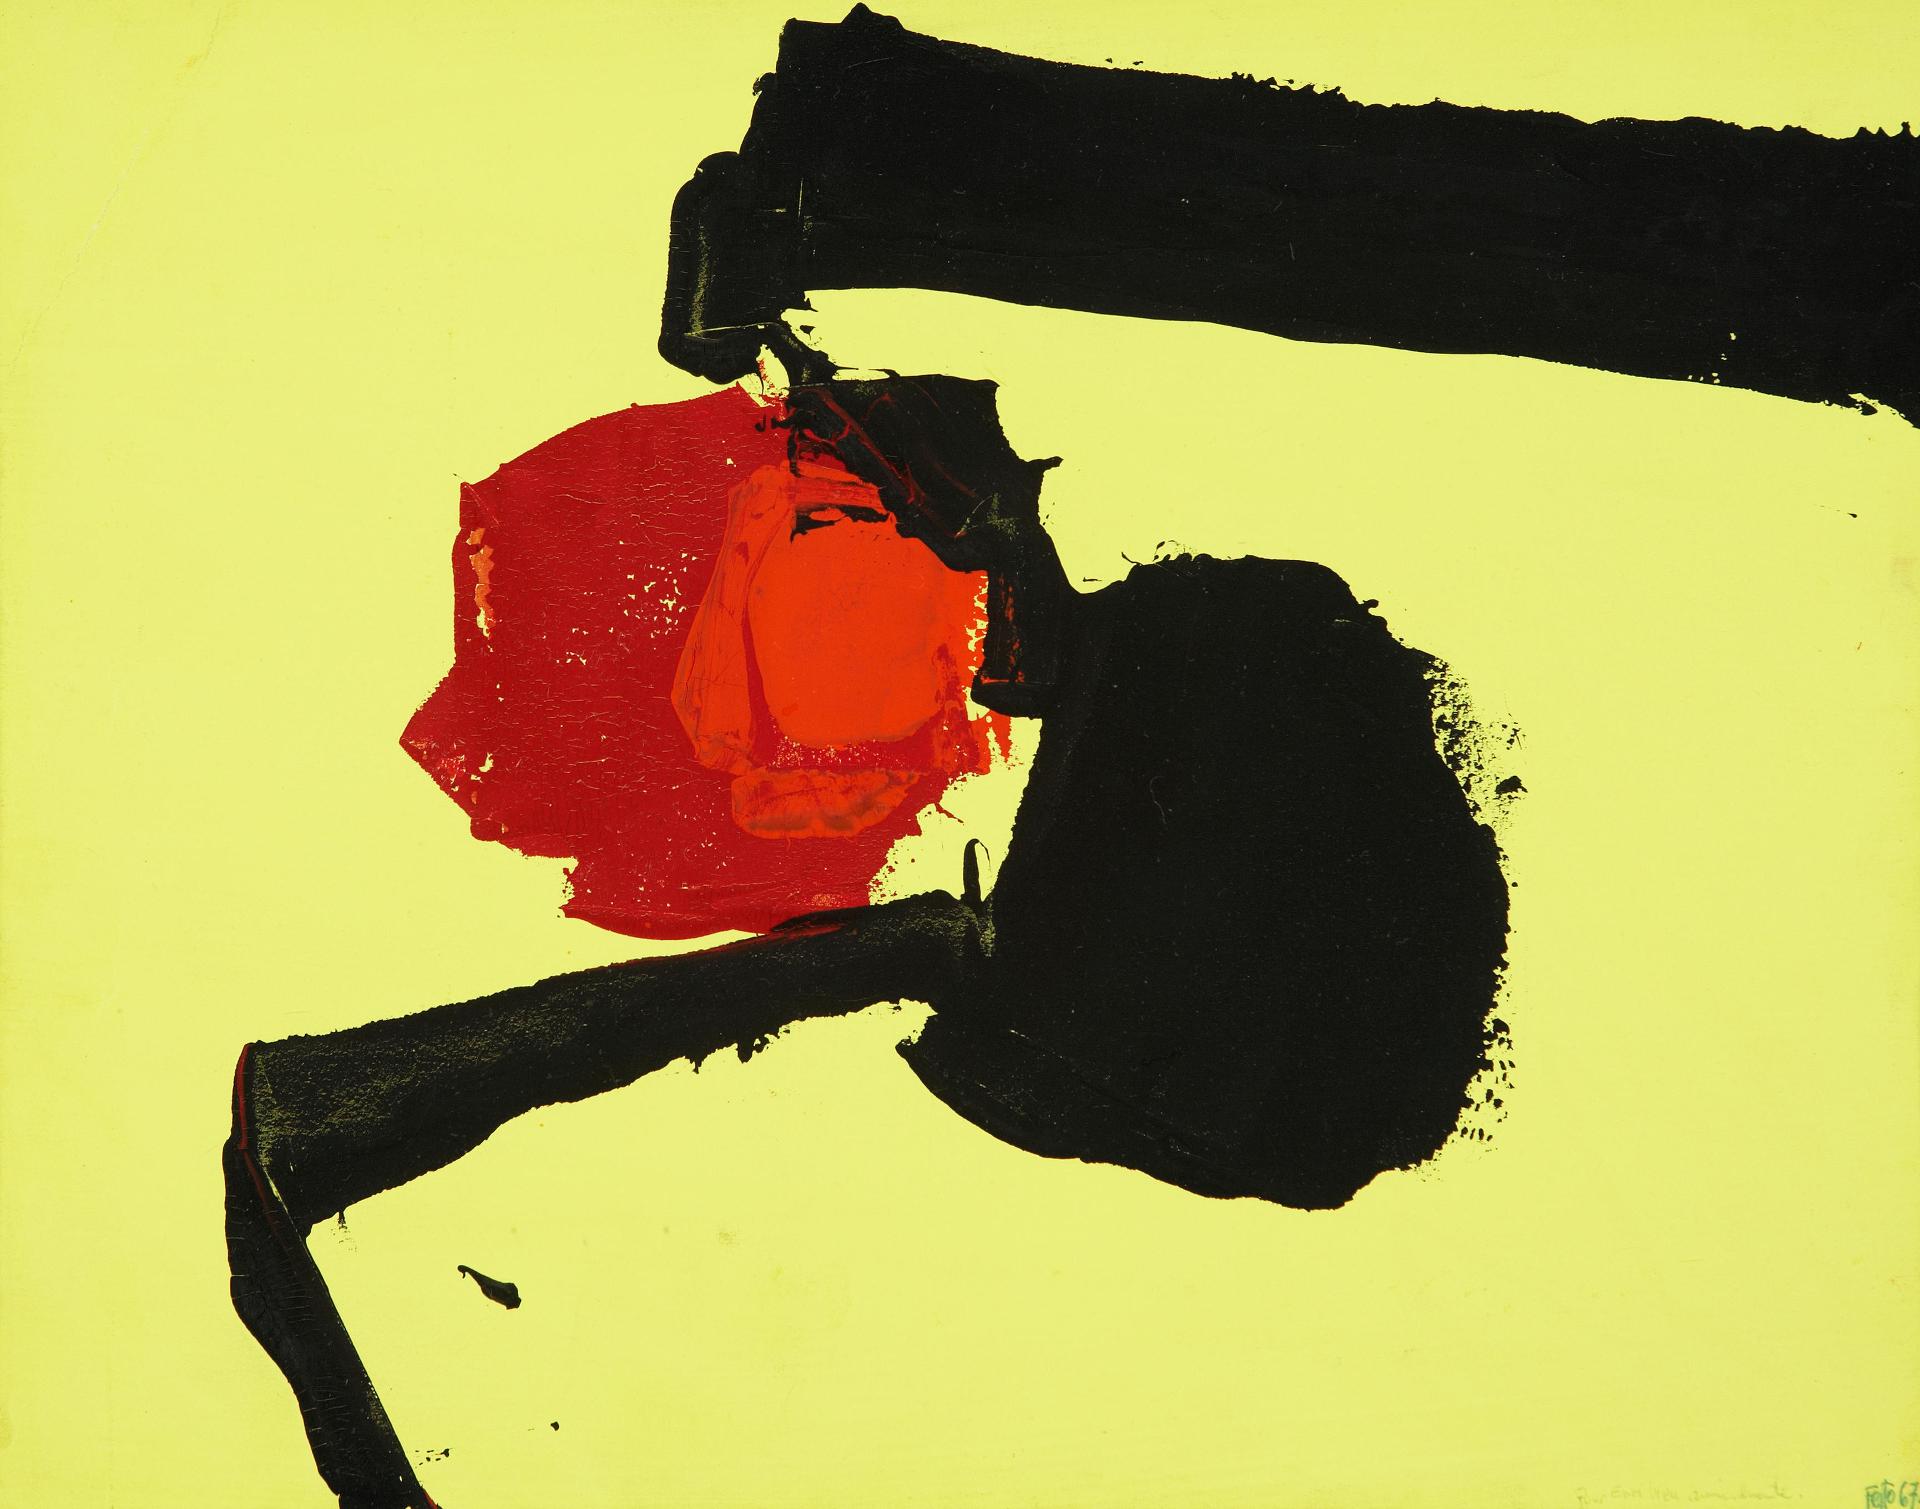 Louis Feito Lopez (1929-2021) - Untitled (Abstract in yellow, black and red)